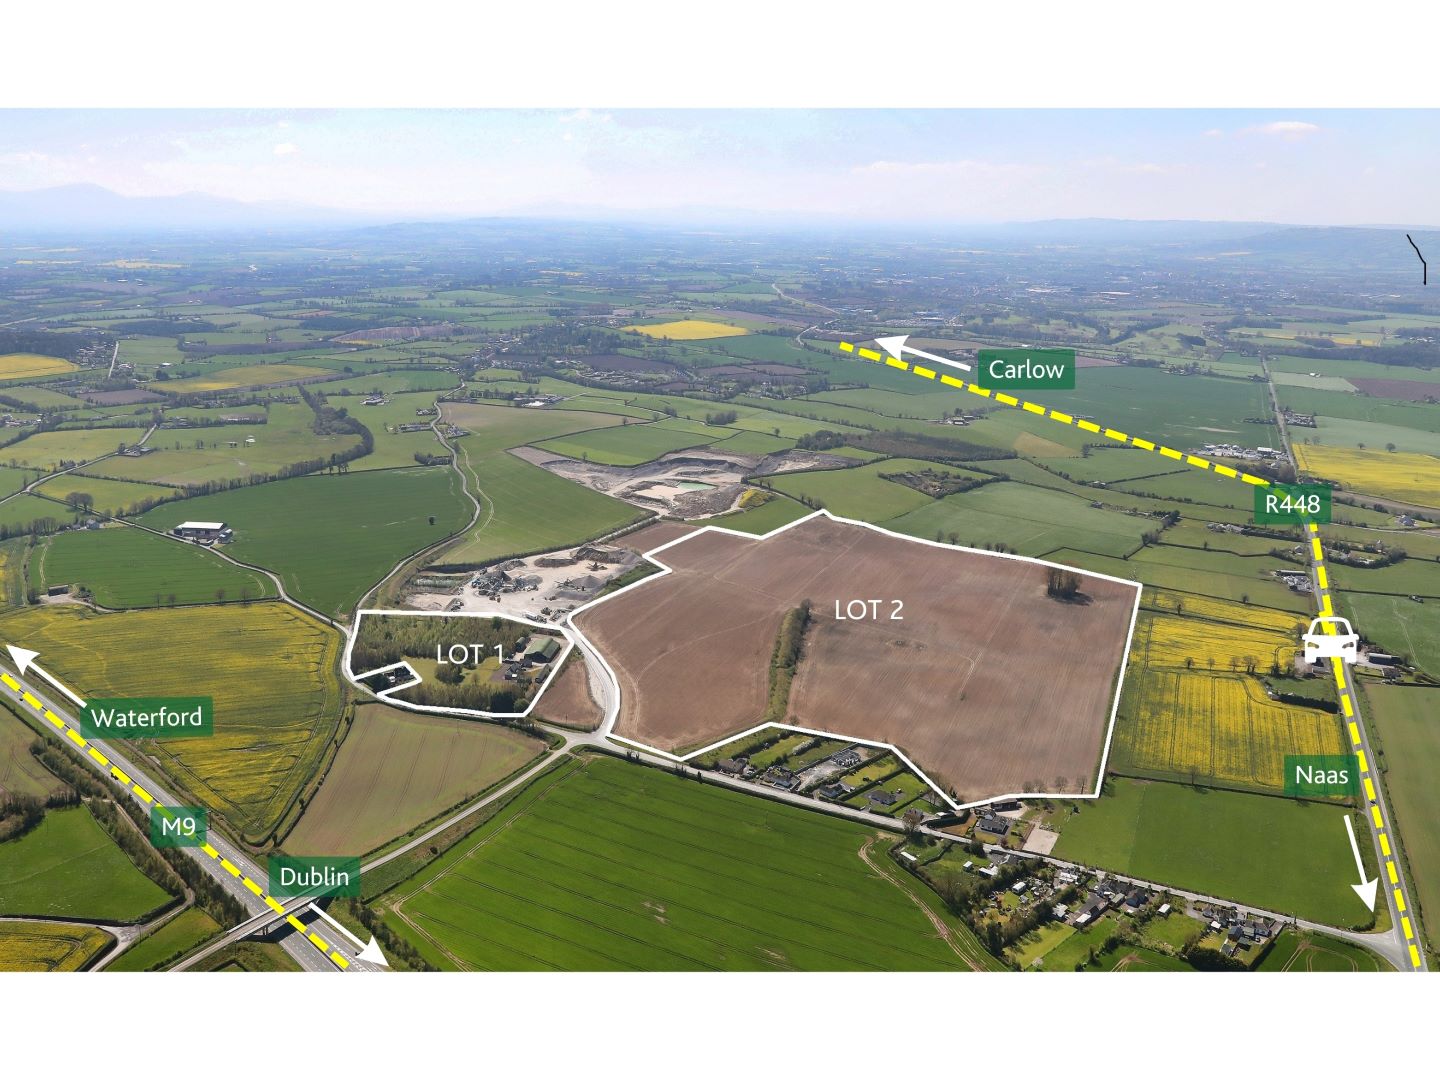 Coonan Property sell c. 80 acres for almost €21,000 per acre at Public Auction